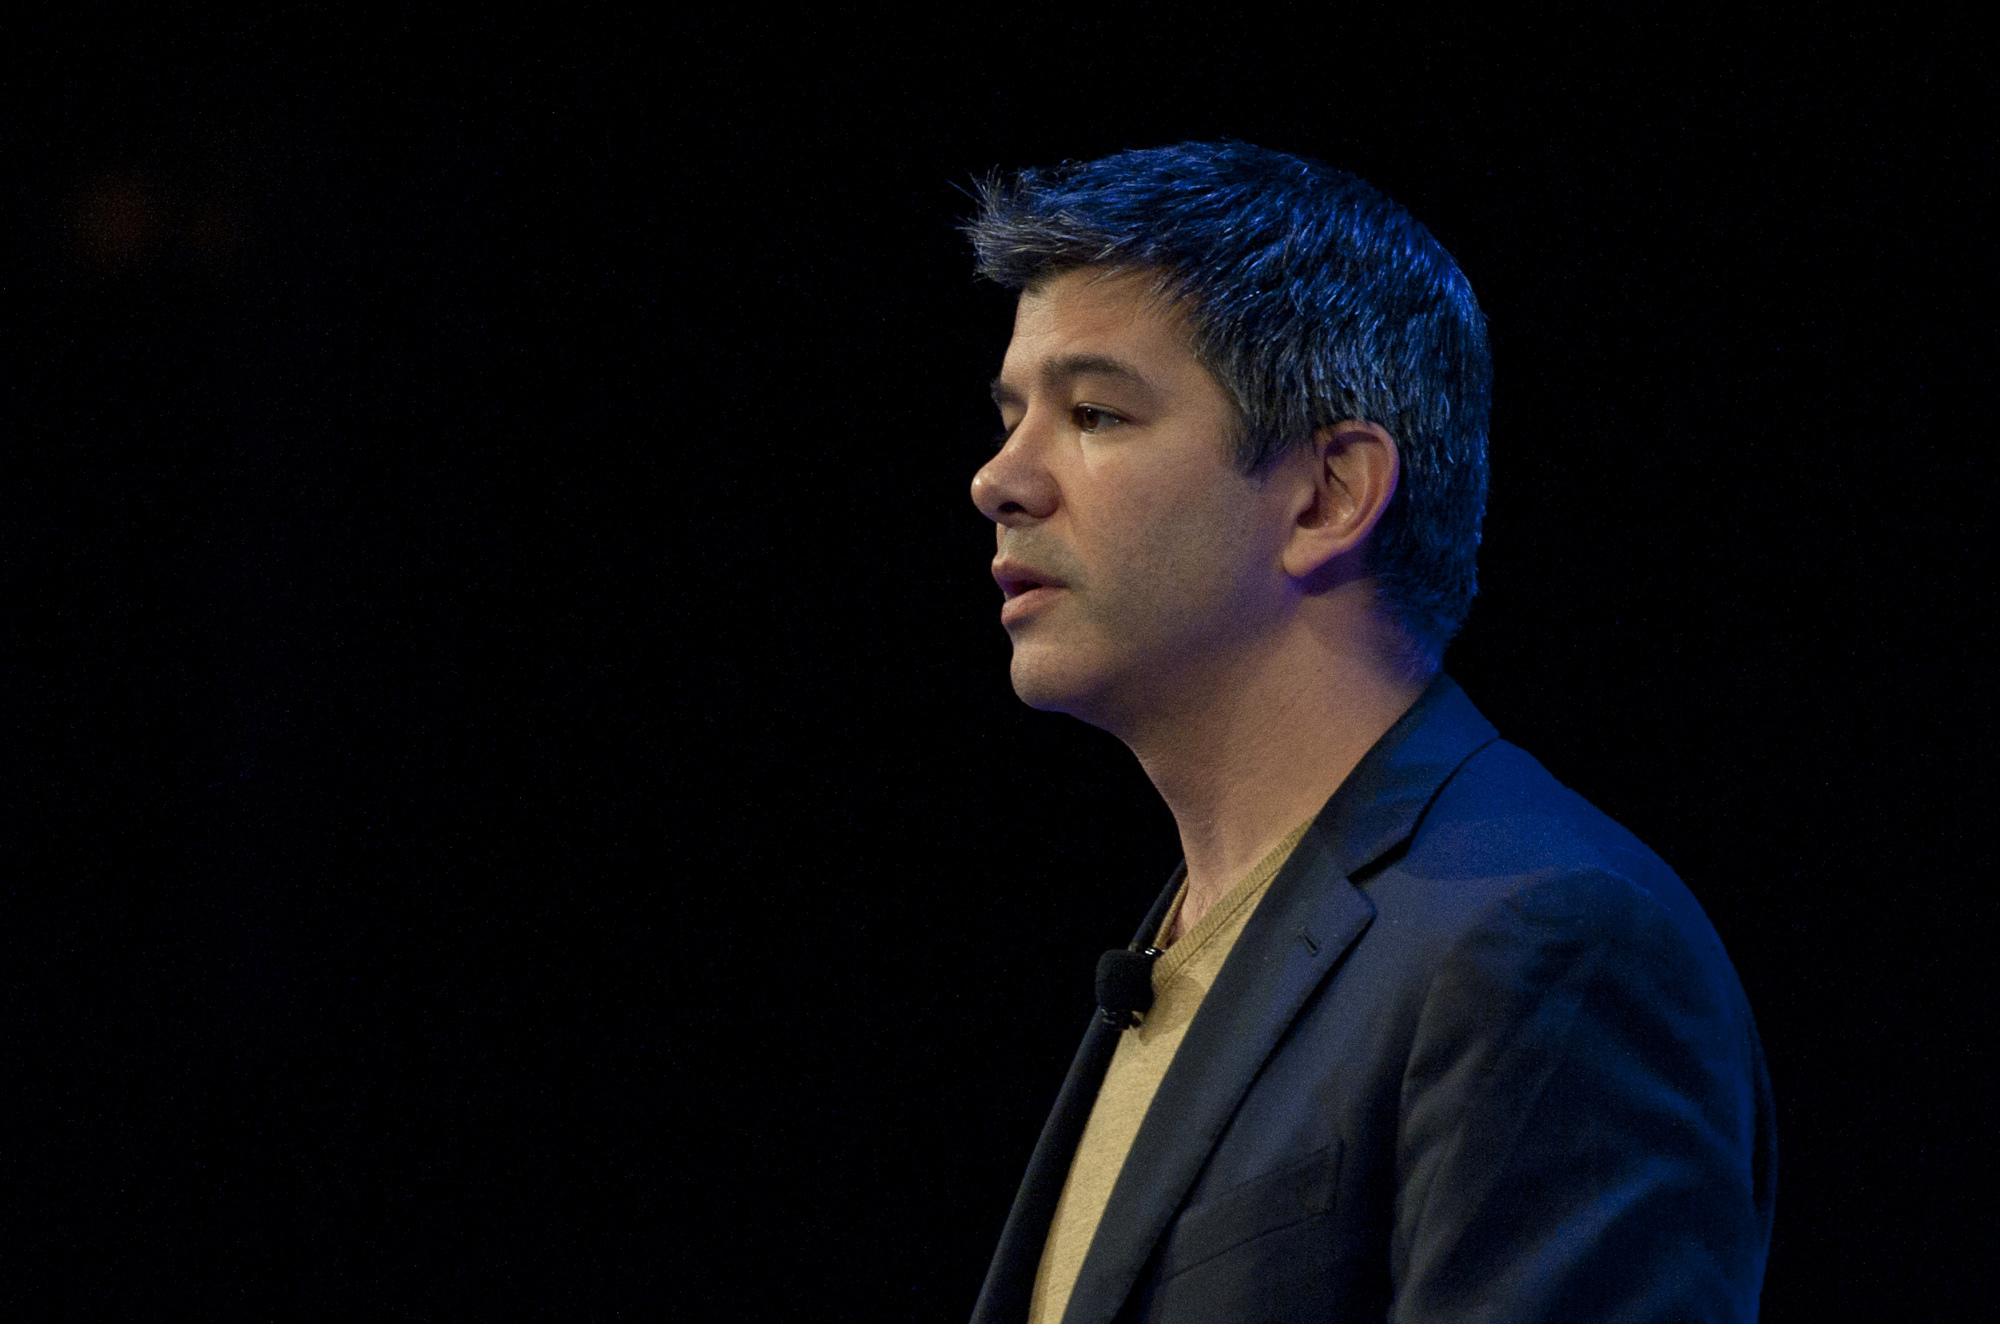 Where Is Ousted Uber CEO Travis Kalanick Now? - Career, Net Worth